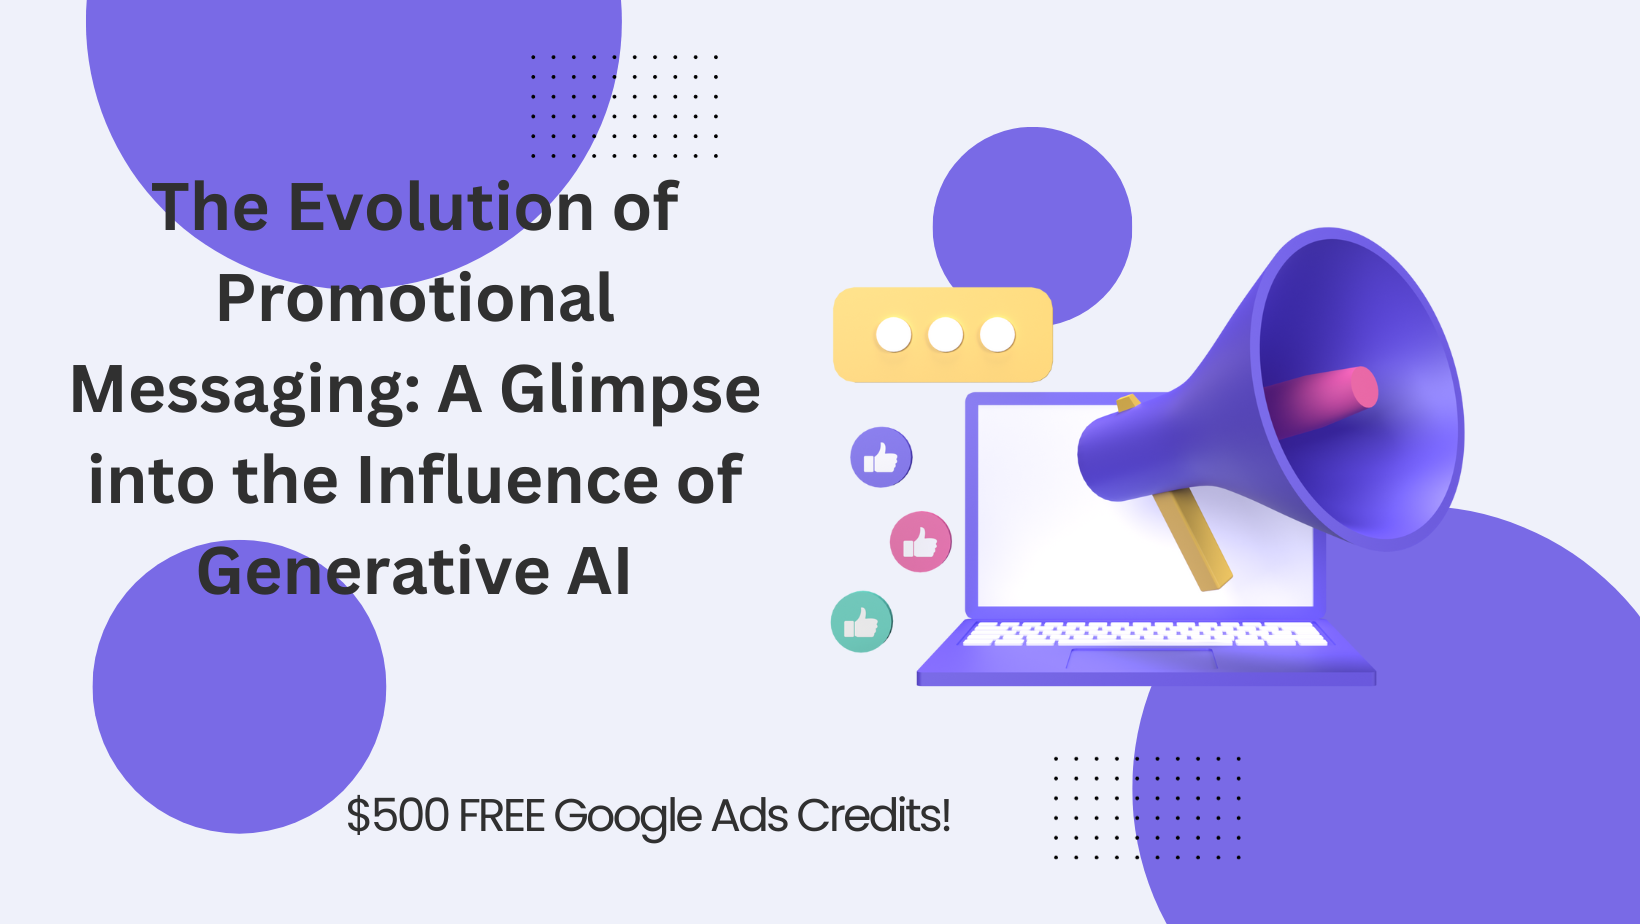 The Evolution of Promotional Messaging: A Glimpse into the Influence of Generative AI